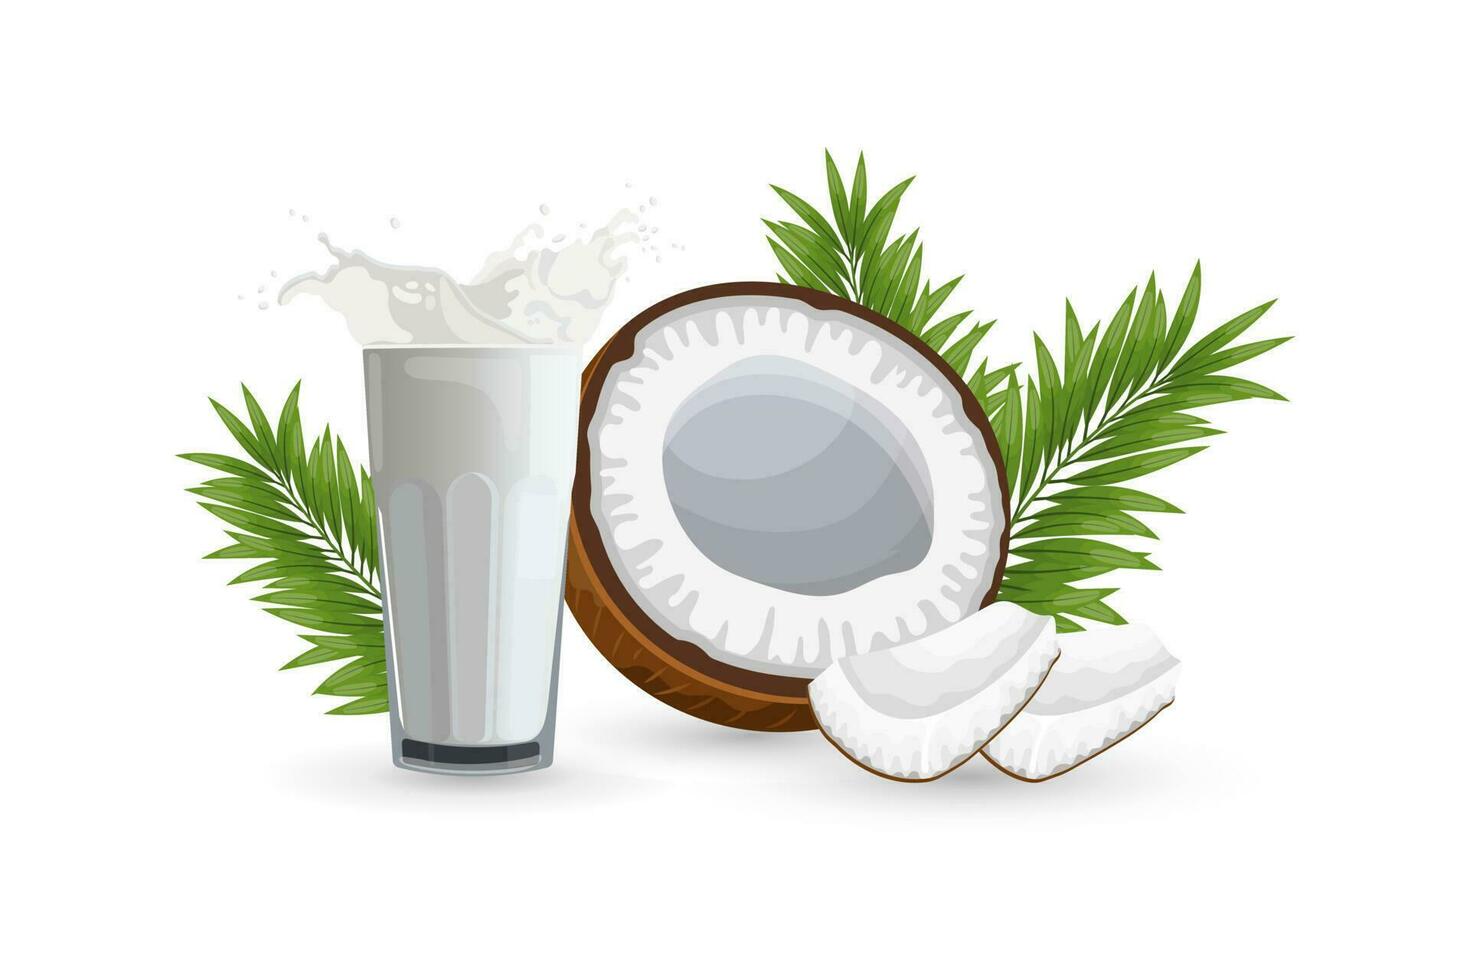 Coconut, half a coconut, pieces of coconut and a glass of milk with splashes on a white background. Illustration, vector